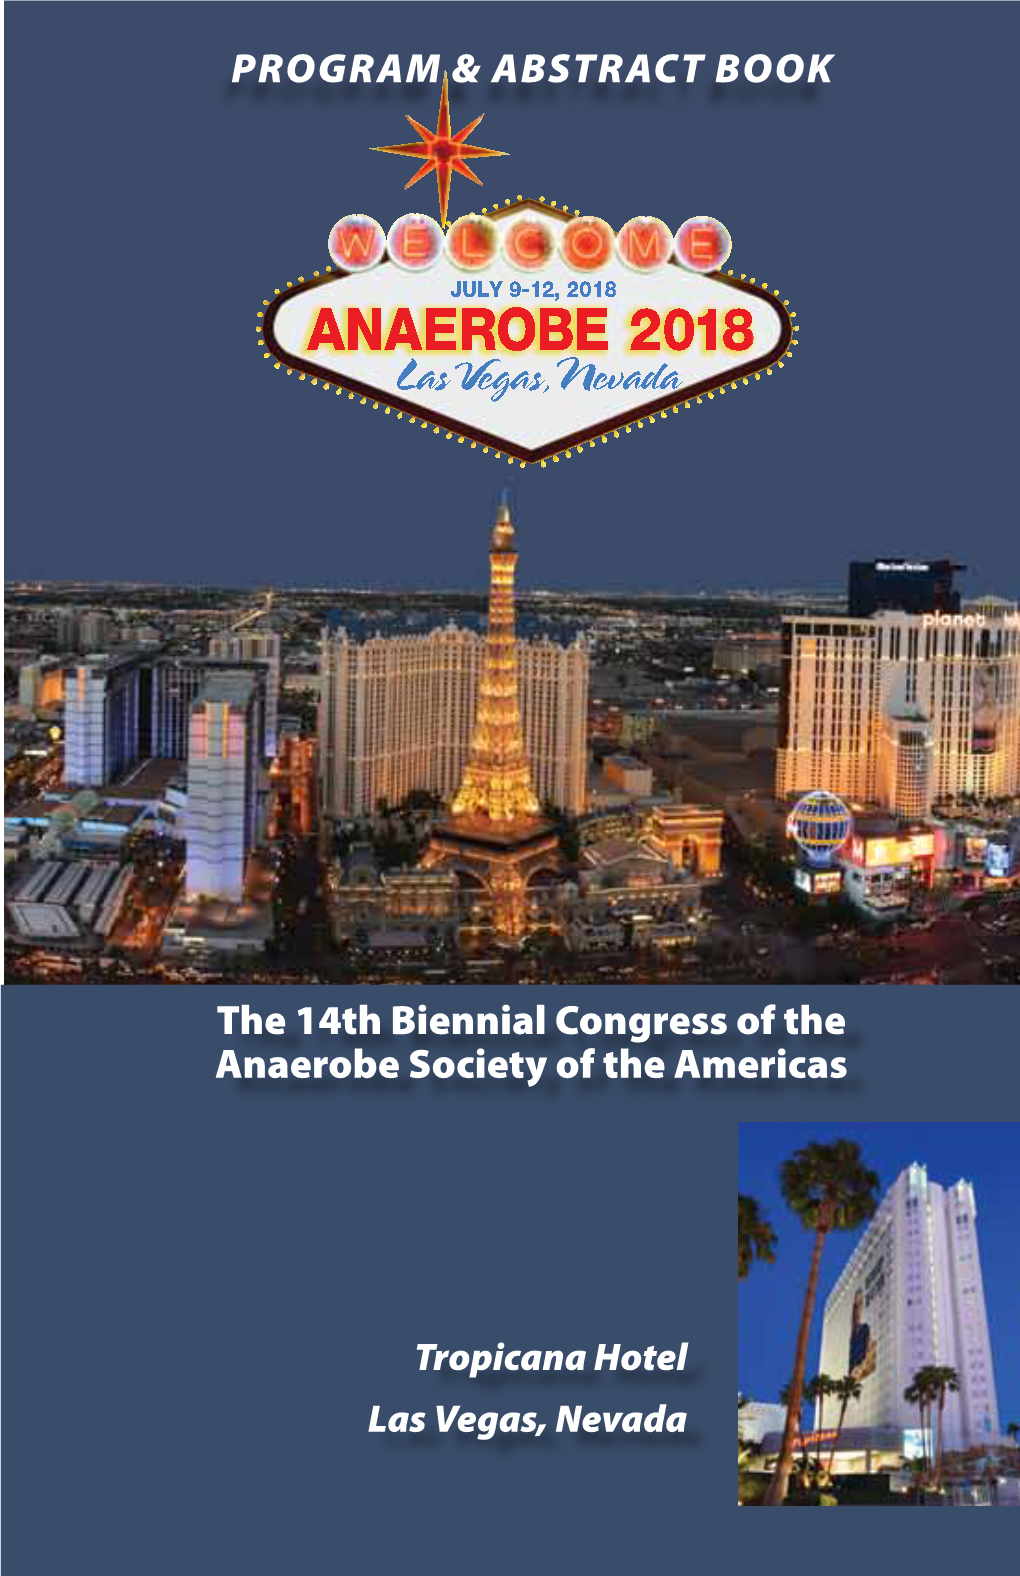 Anaerobe 2018 Congress Committee Course Director Jeanne Marrazzo, M.D., M.P.H